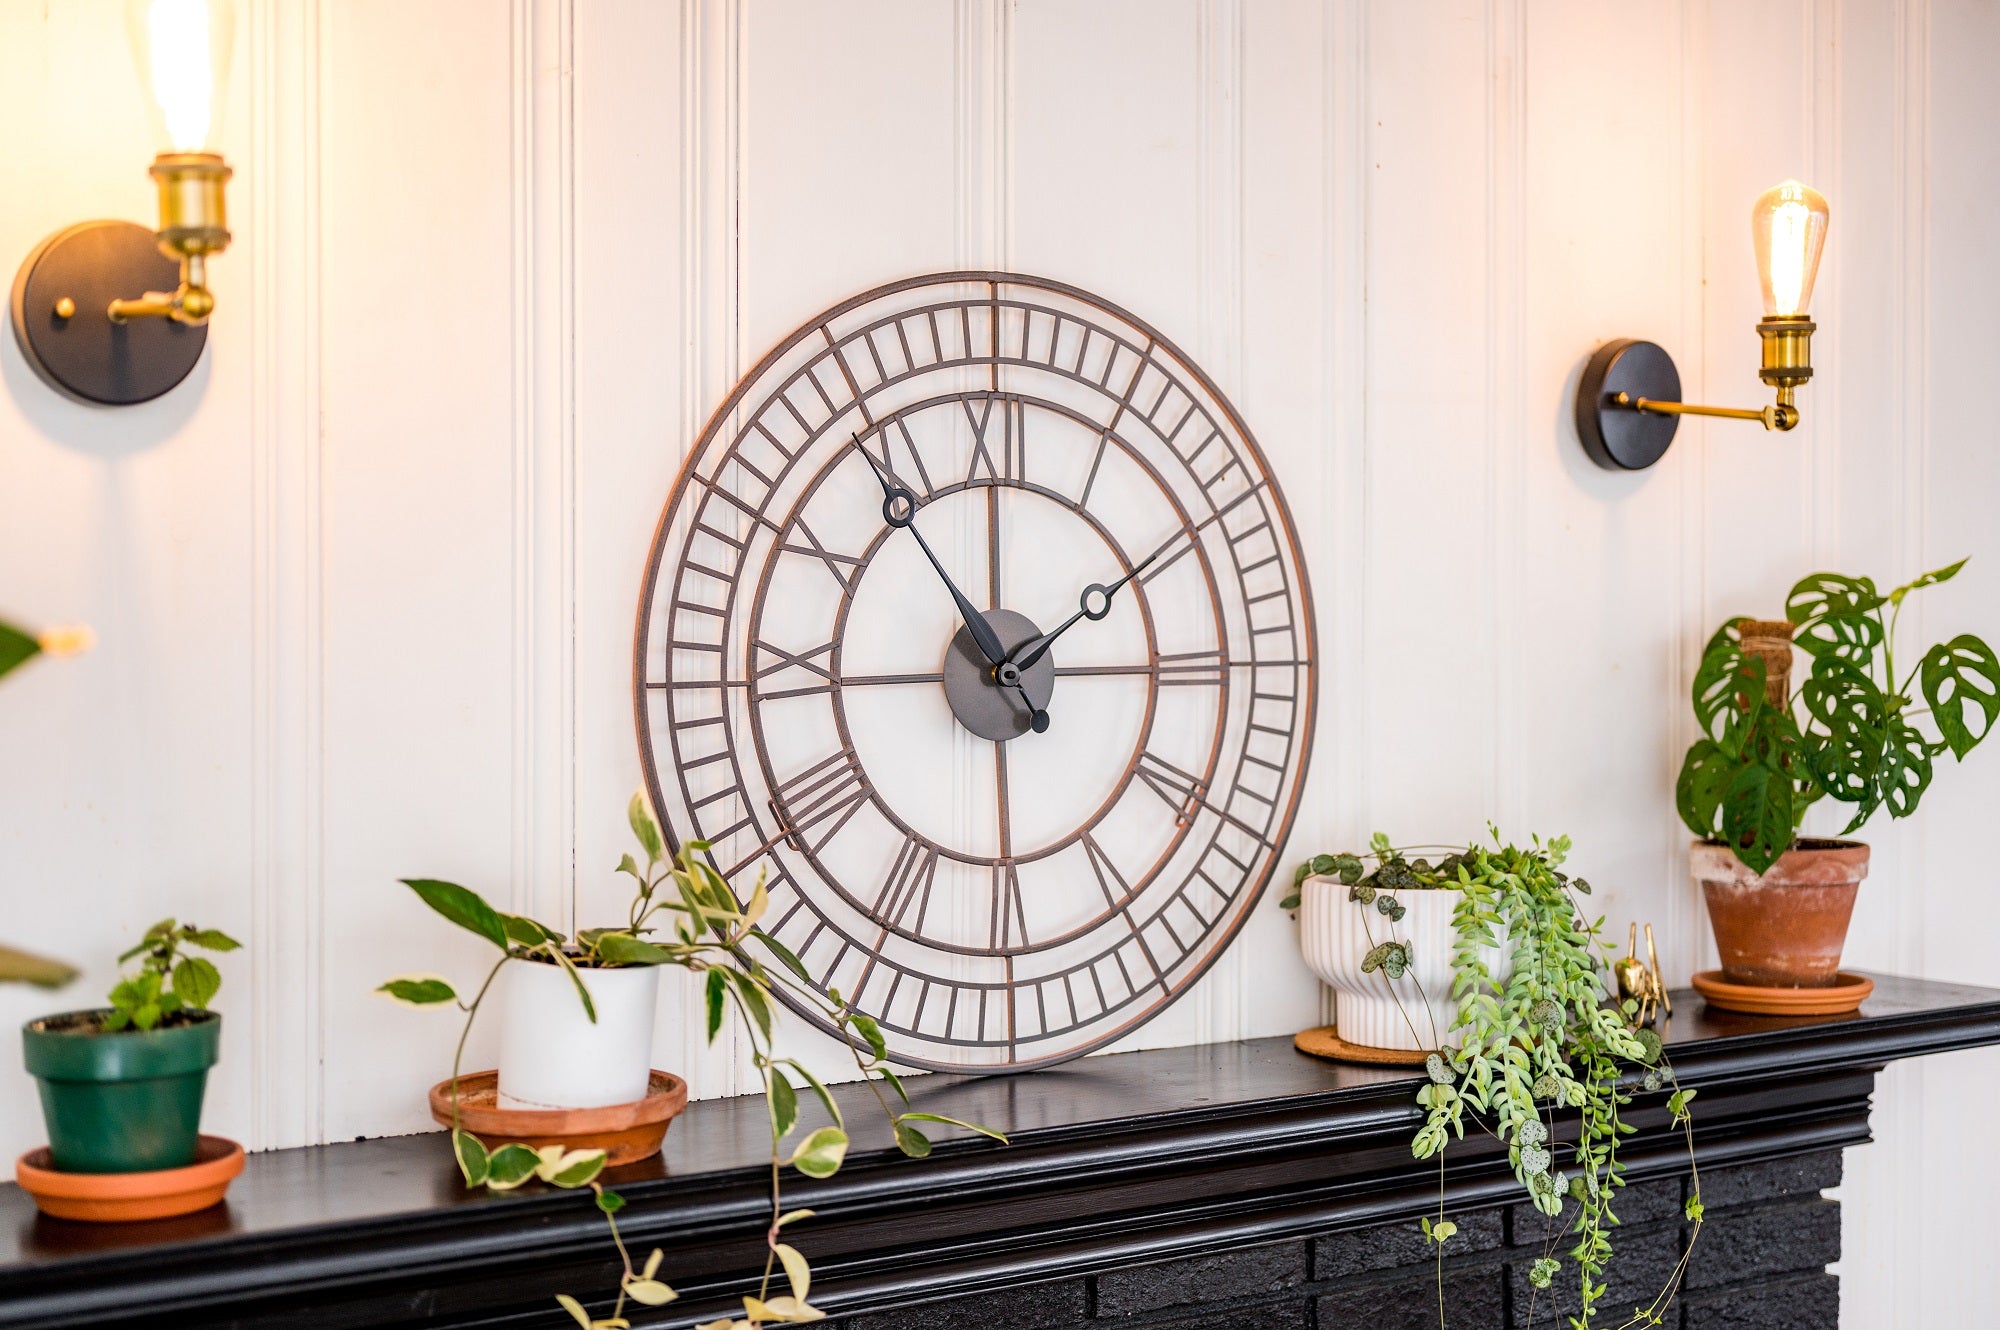 Claire Wall Clock 24 by Hermle